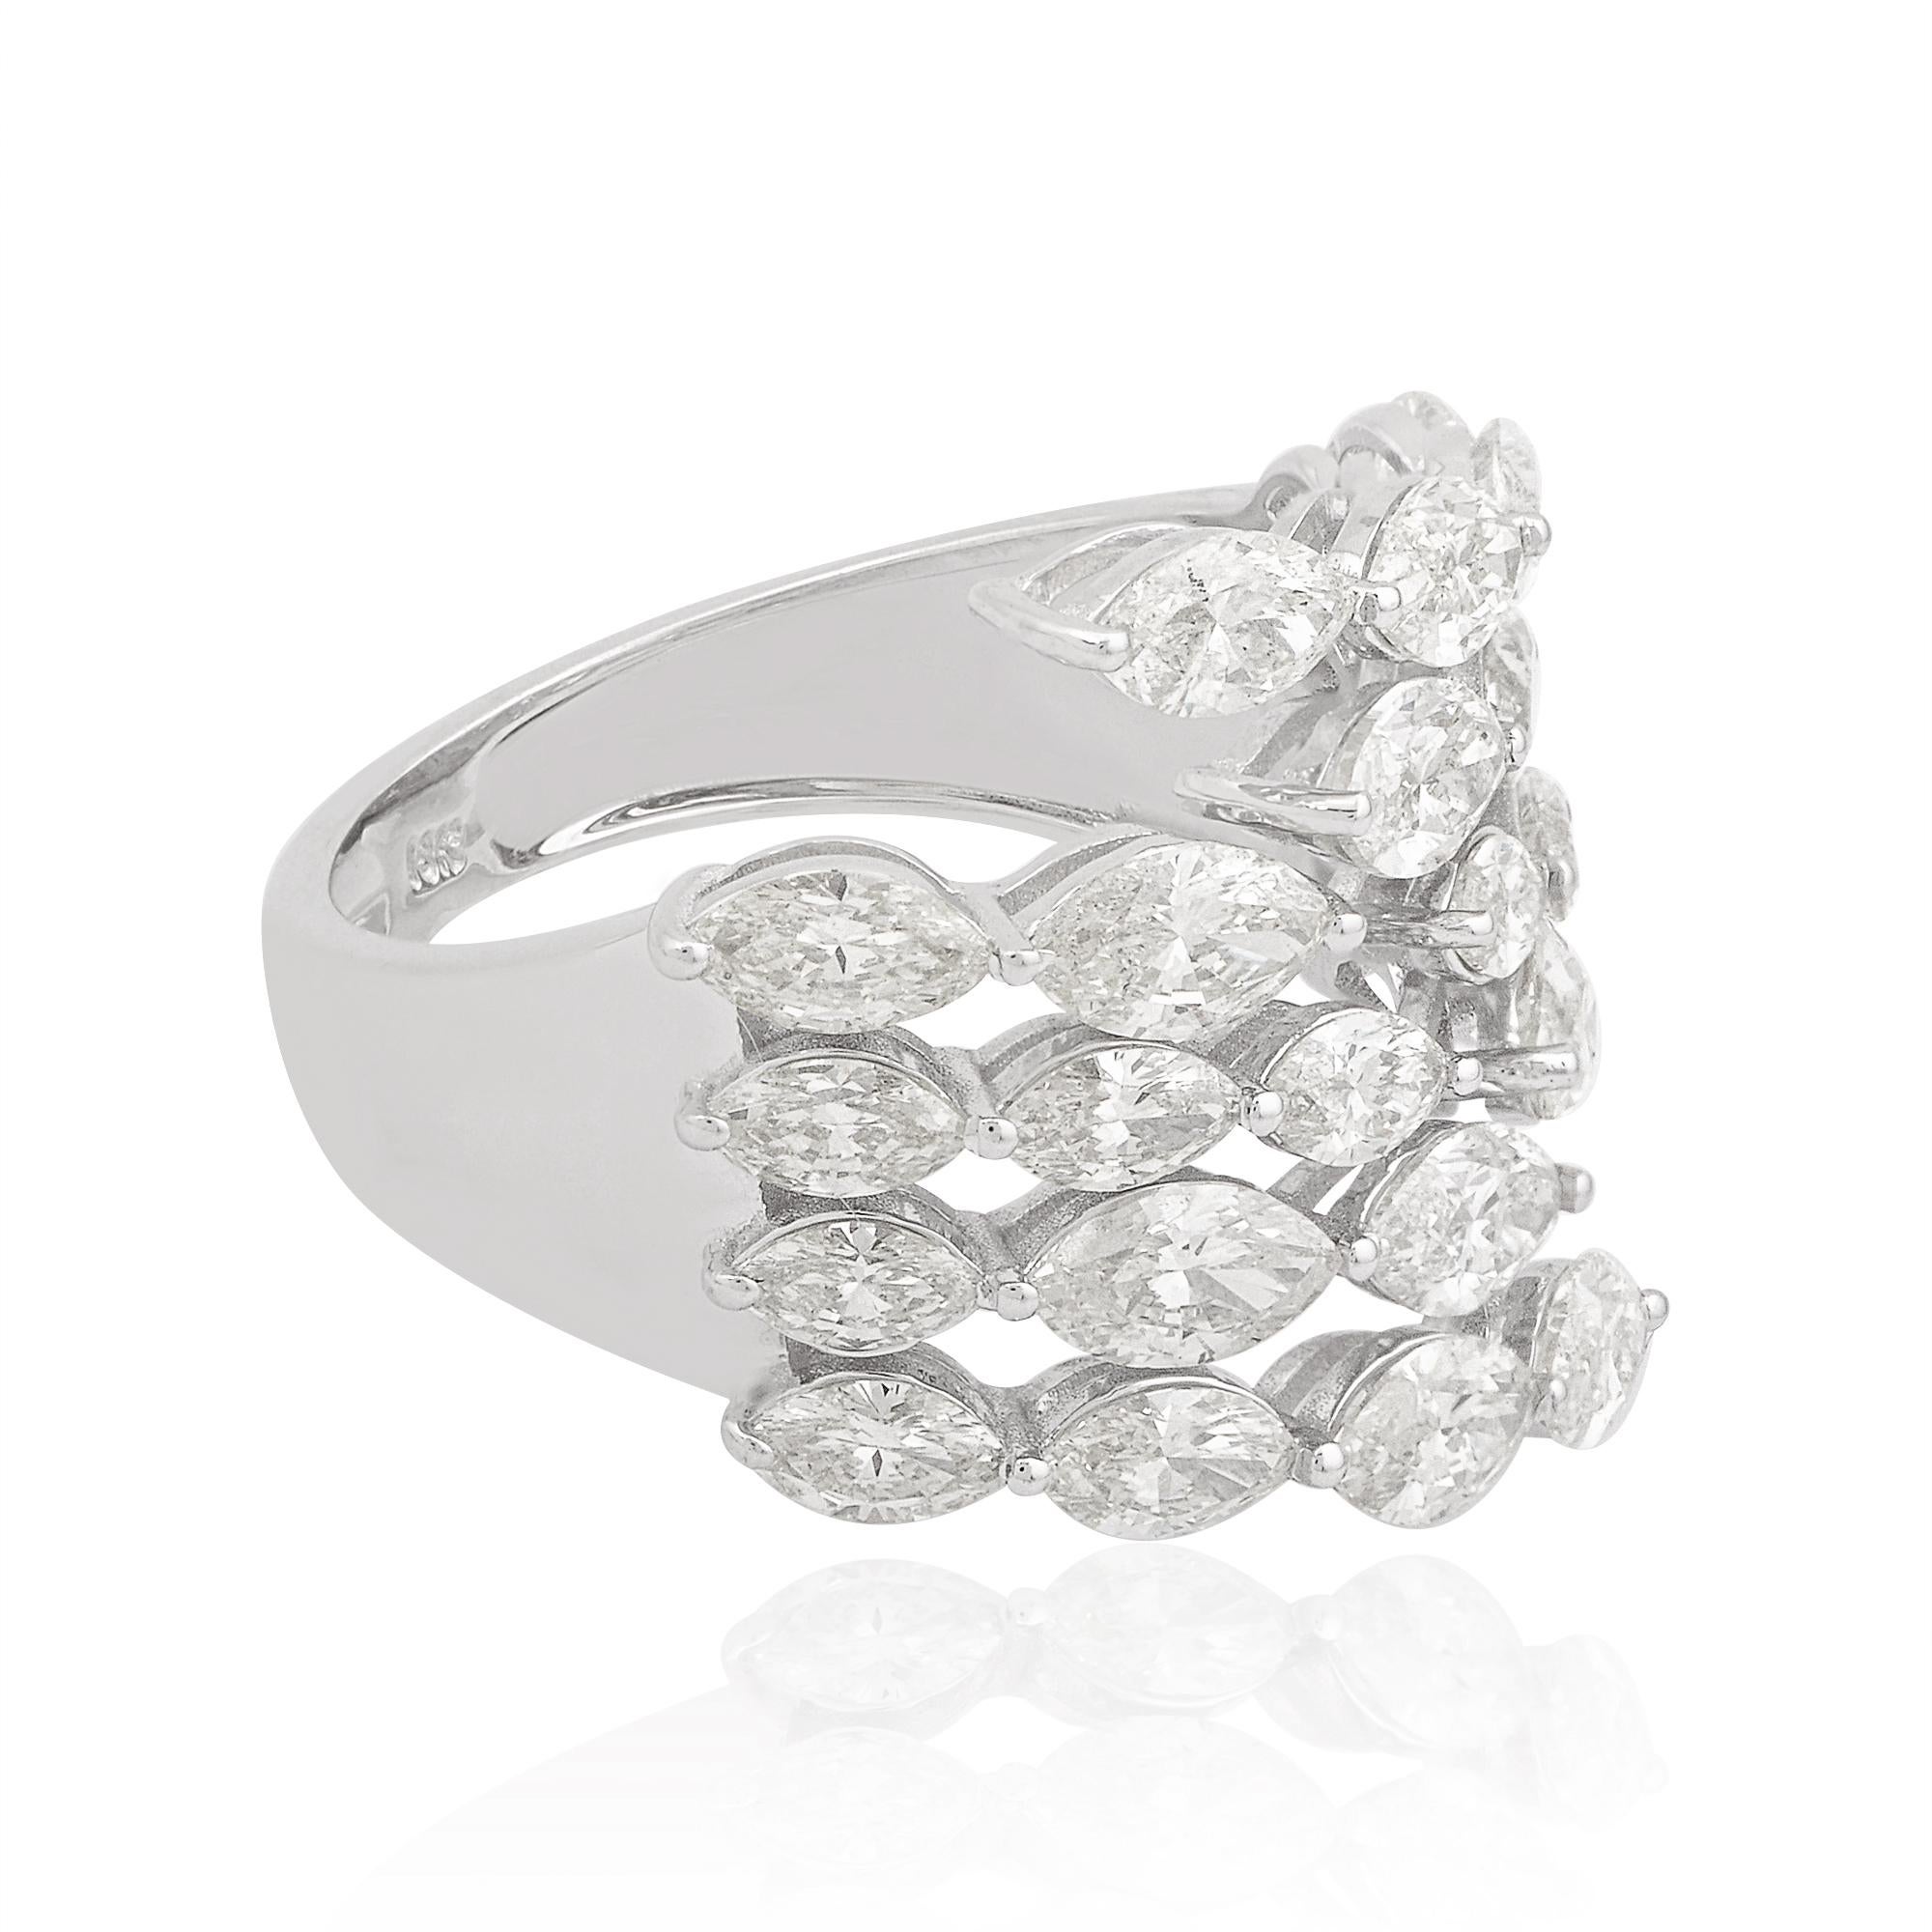 Crafted in solid 14k Gold, this ring features a cluster of sparkling diamonds, creating a truly dazzling effect. The diamonds are expertly set in a secure prong setting, ensuring that they stay in place and catch the light at every angle.

This is a